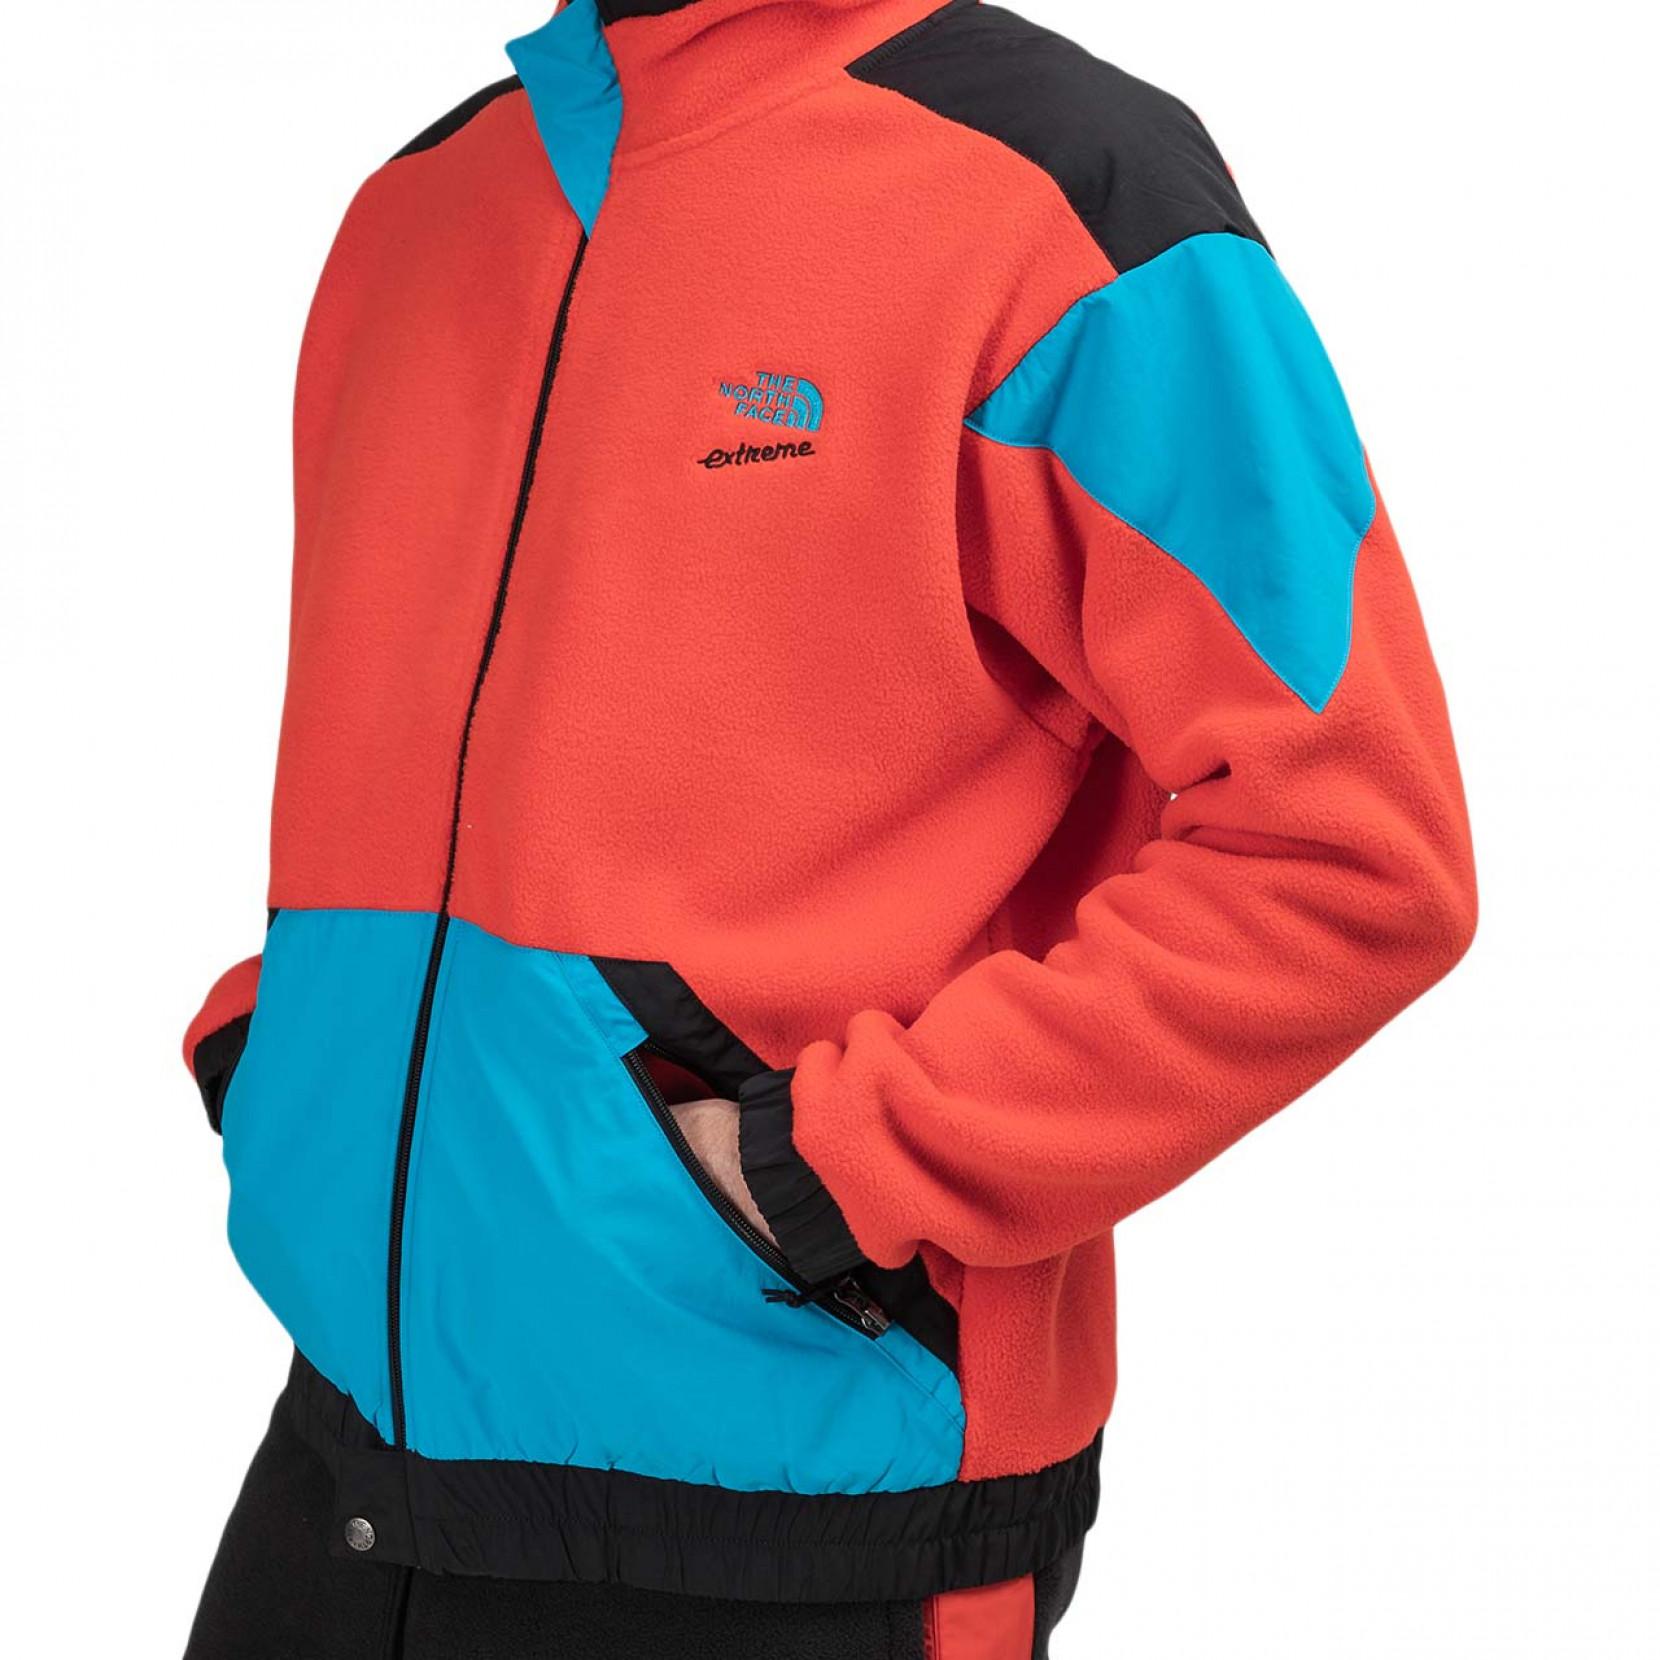 The North Face Extreme Full-zip Fleece Jacket in Red/Blue/Blue 